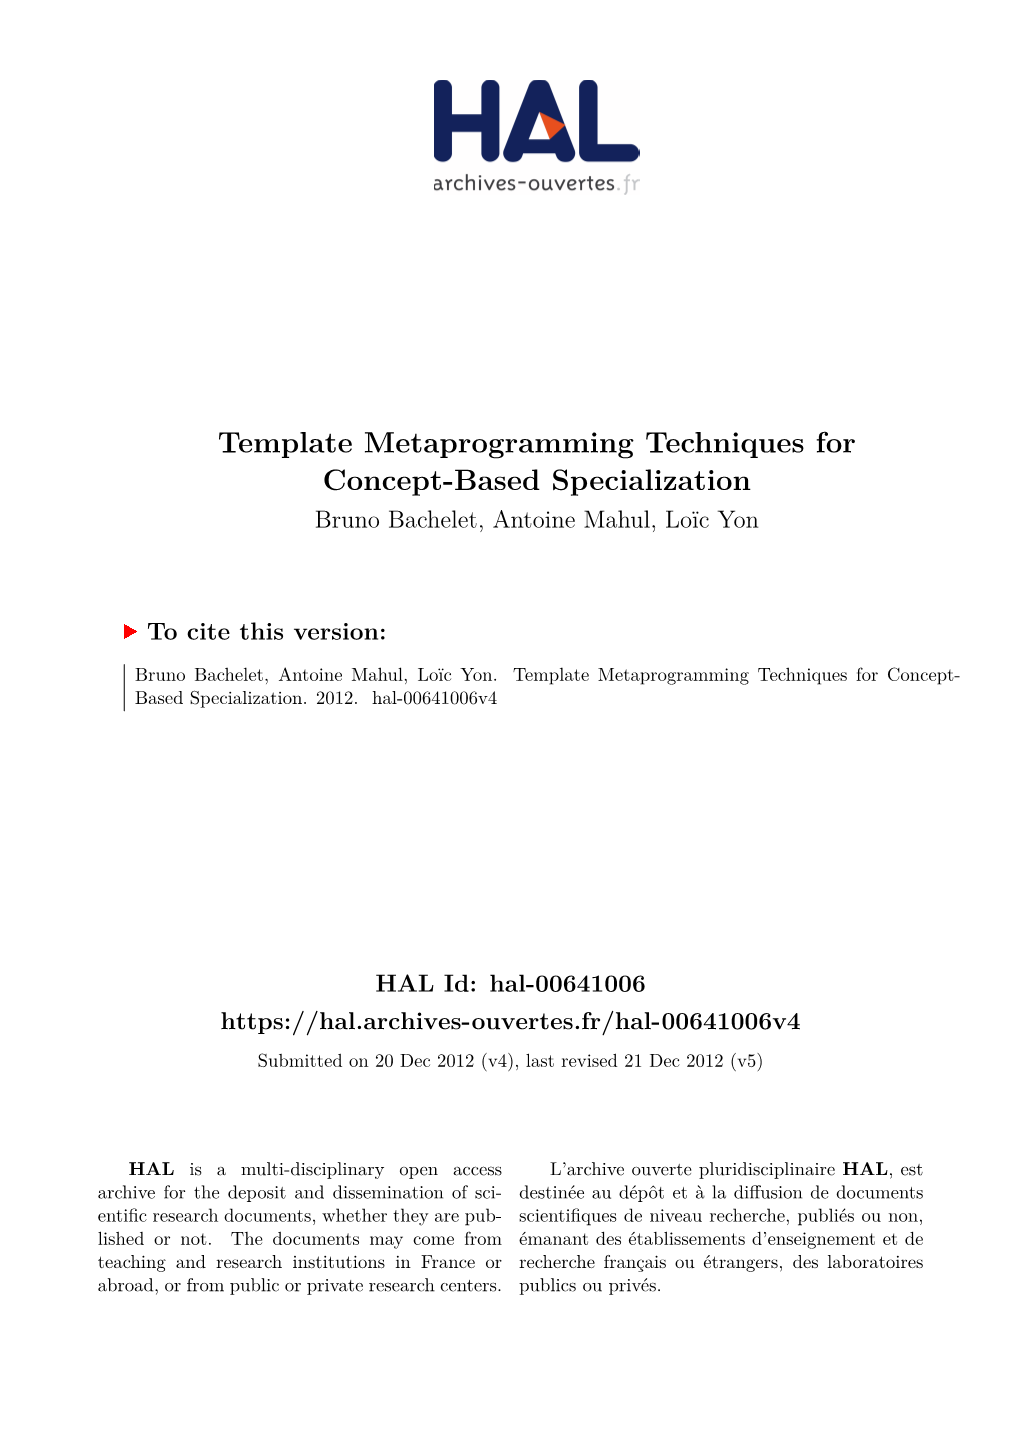 Template Metaprogramming Techniques for Concept-Based Specialization Bruno Bachelet, Antoine Mahul, Loïc Yon